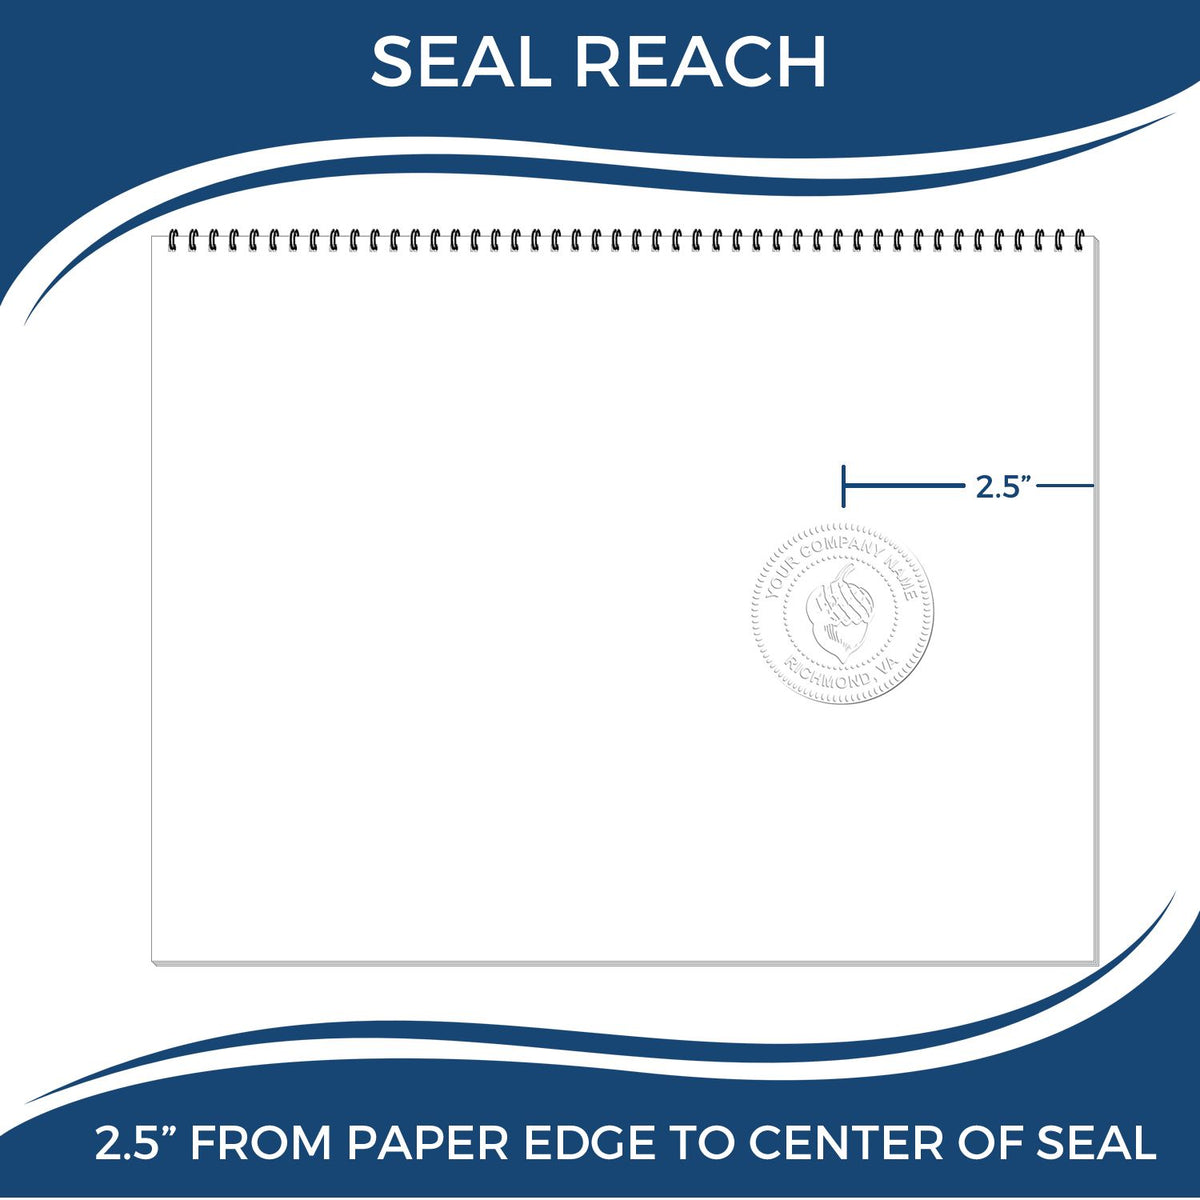 An infographic showing the seal reach which is represented by a ruler and a miniature seal image of the Heavy Duty Cast Iron Vermont Geologist Seal Embosser